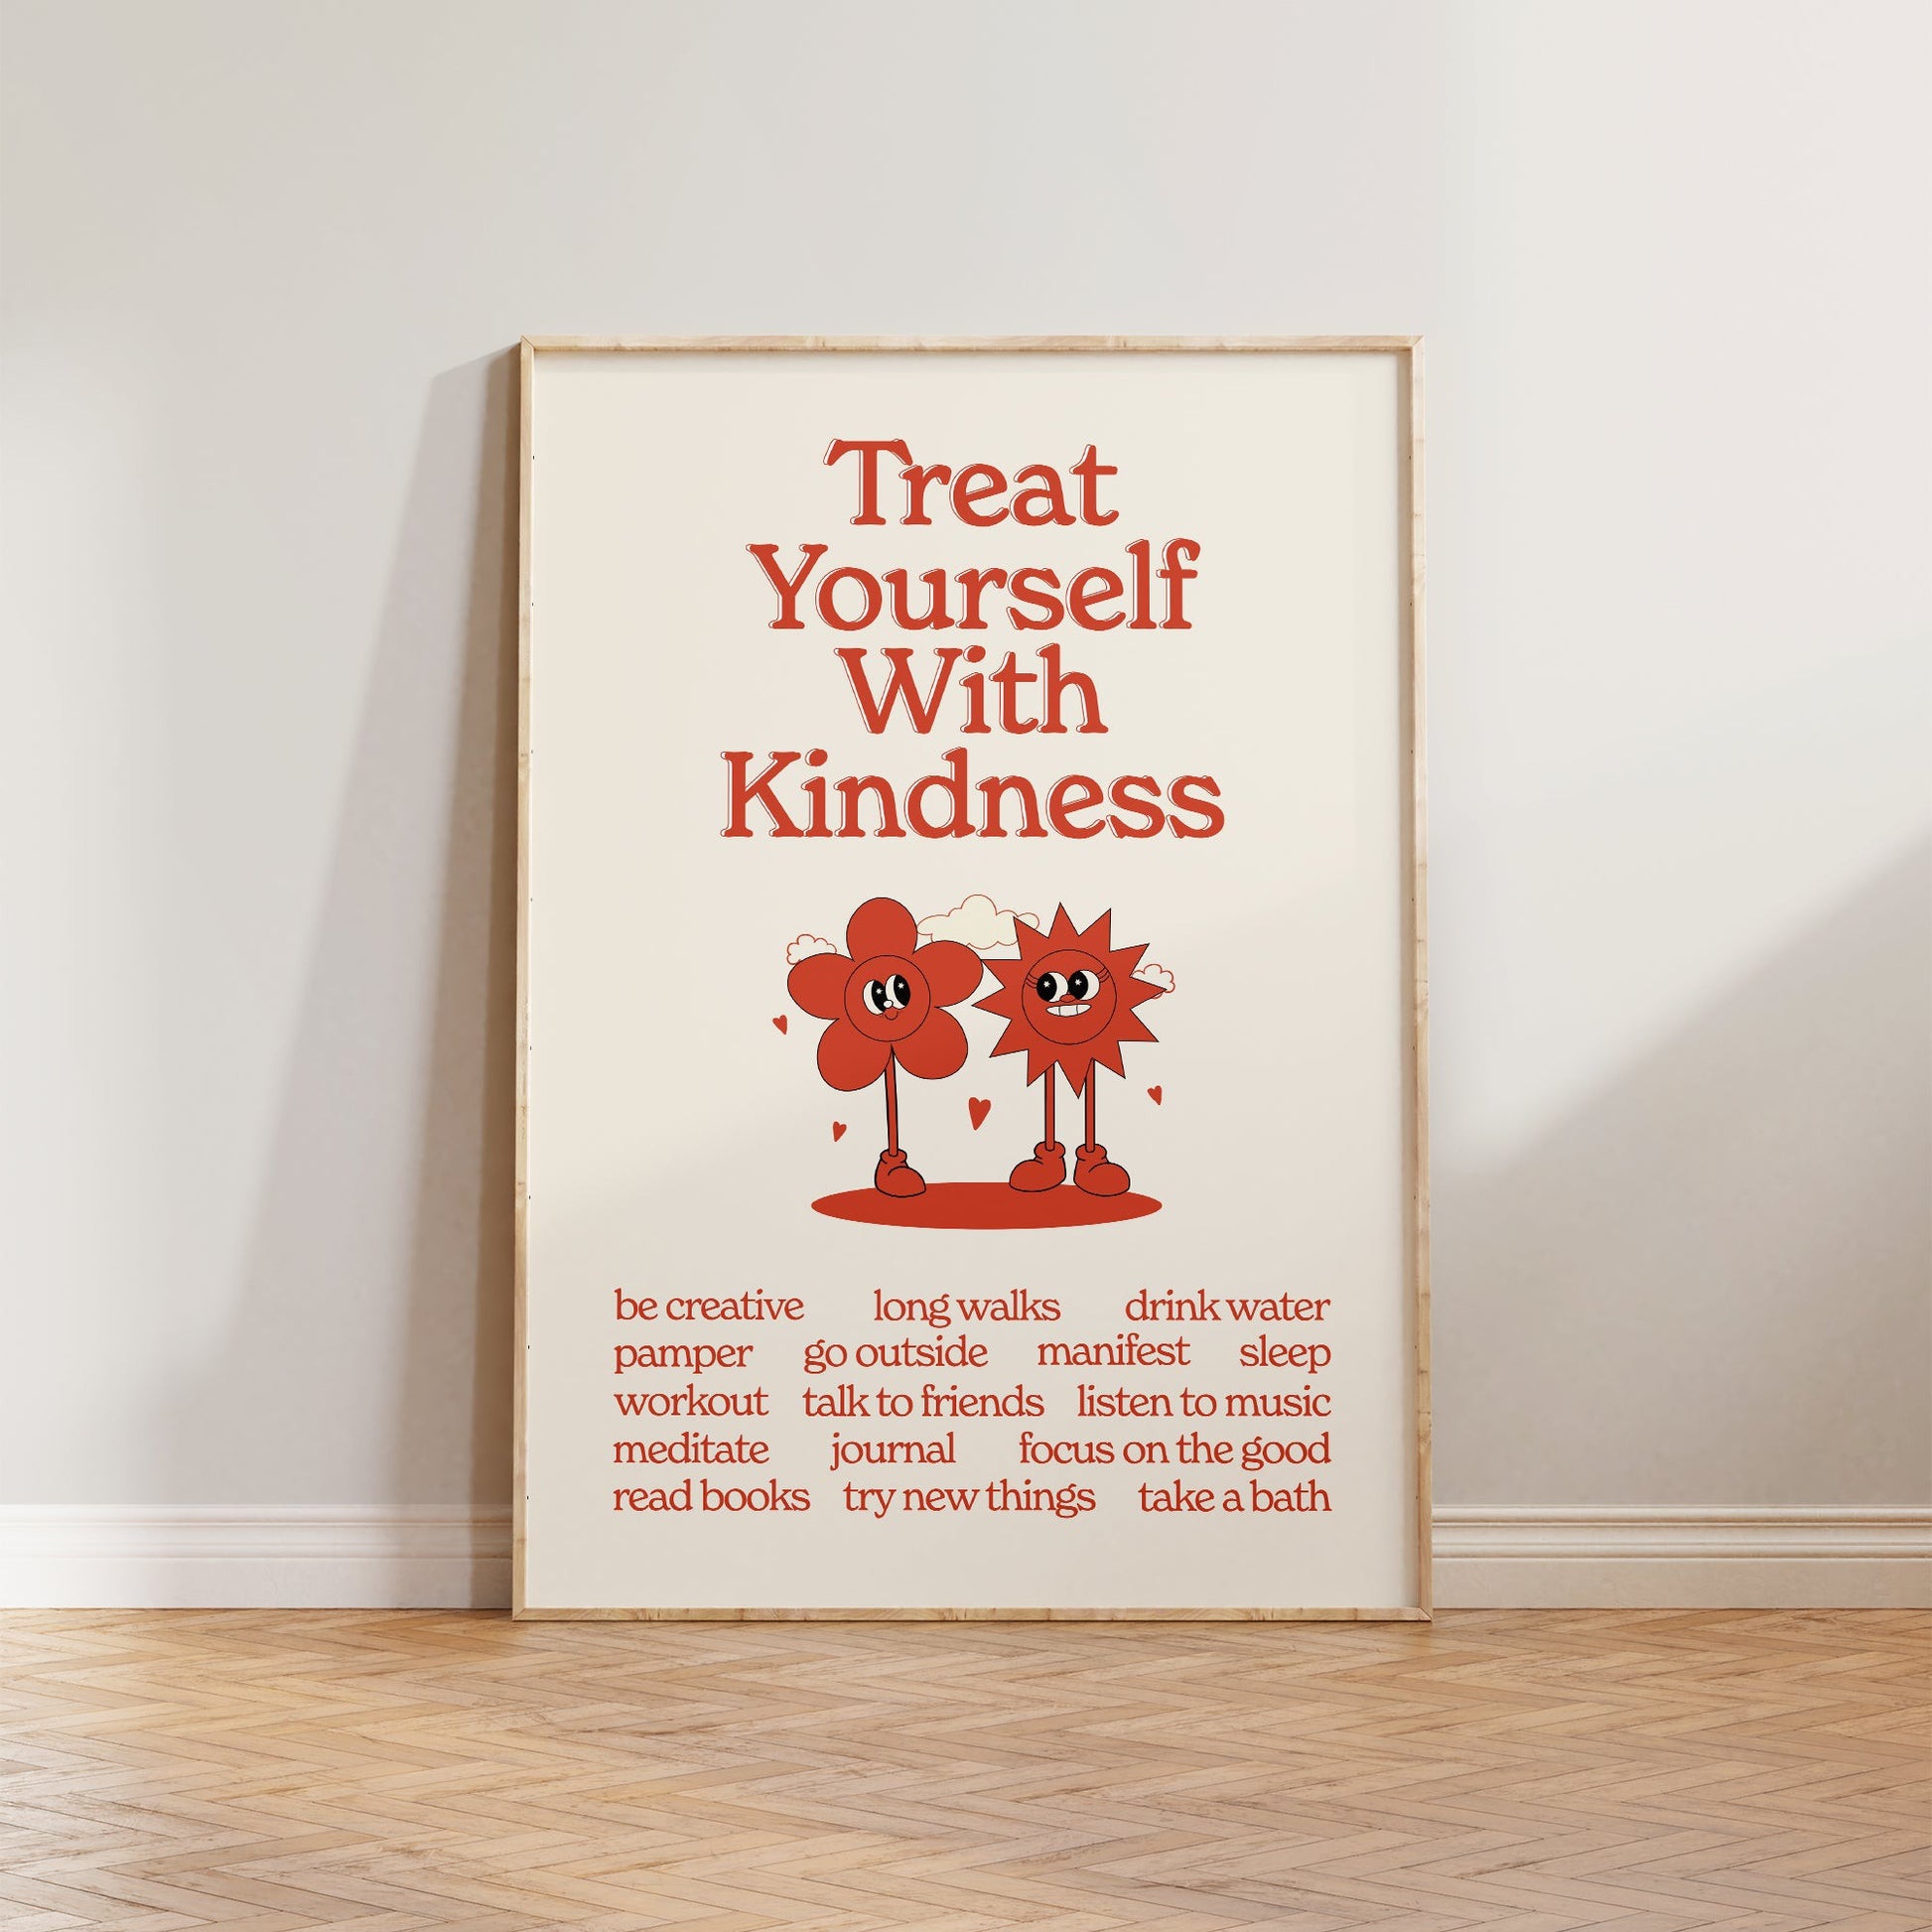 Club Retro – With Treat Kindness Lune Print Yourself